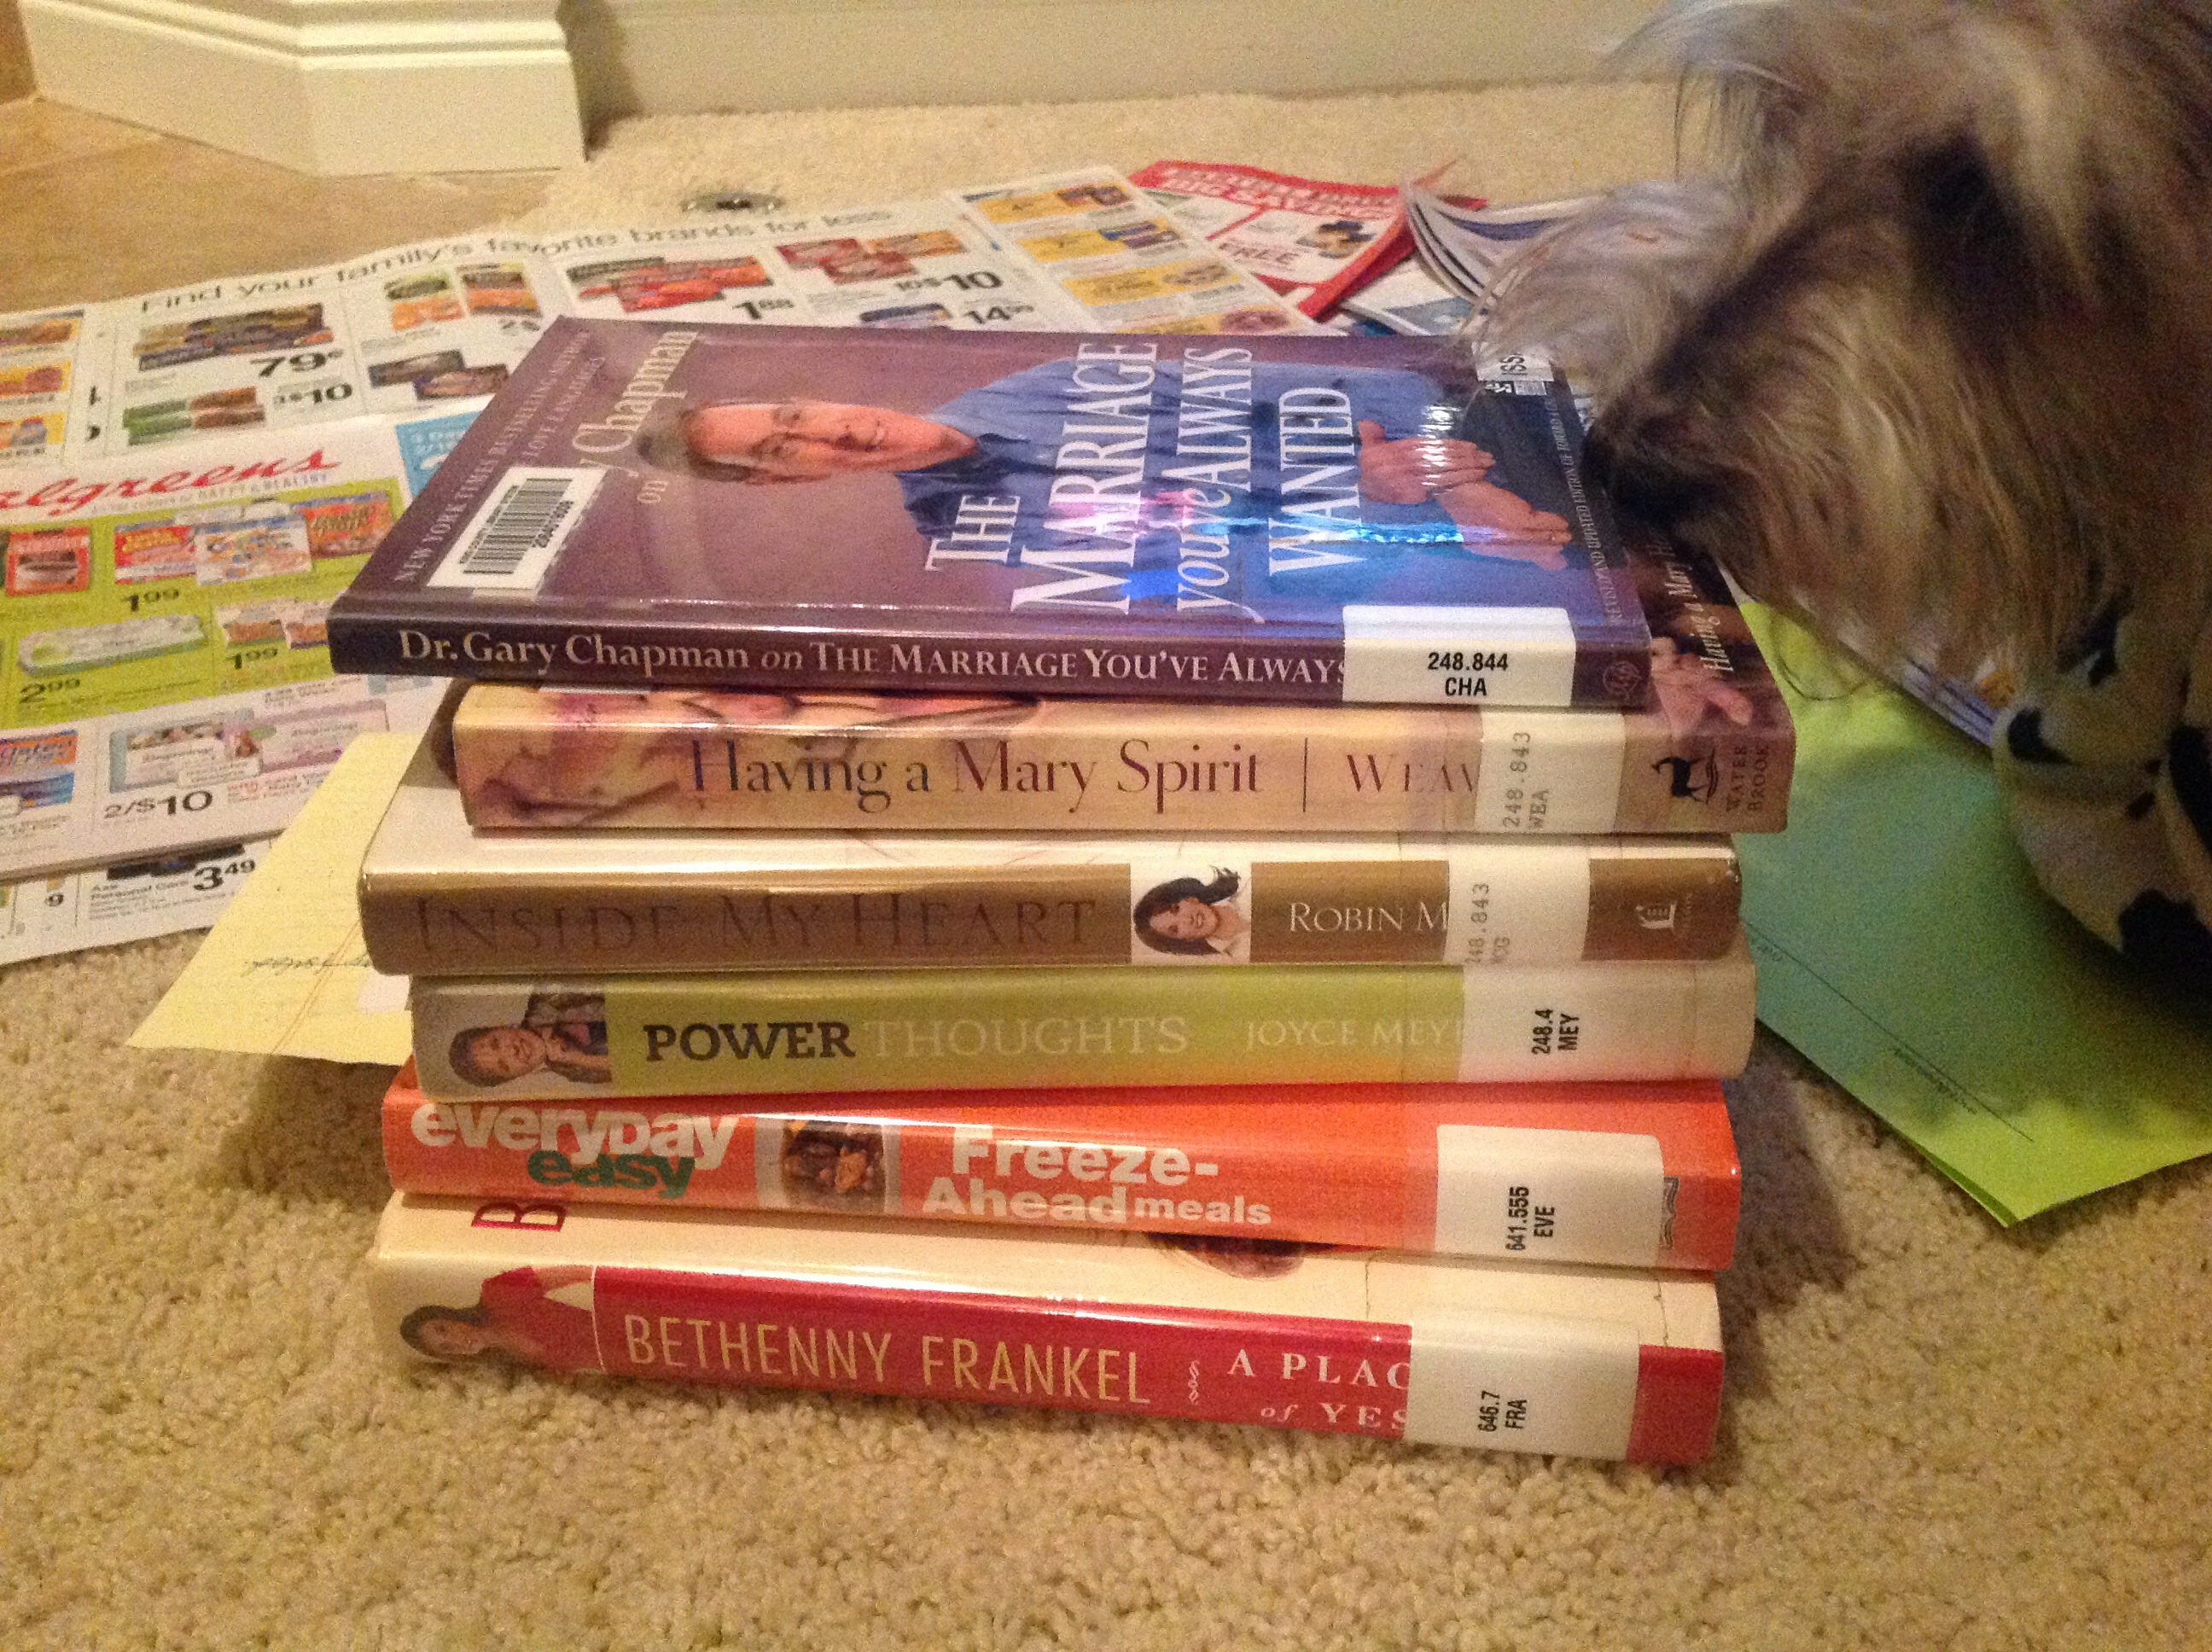 Riley checking out the books I got from the Library